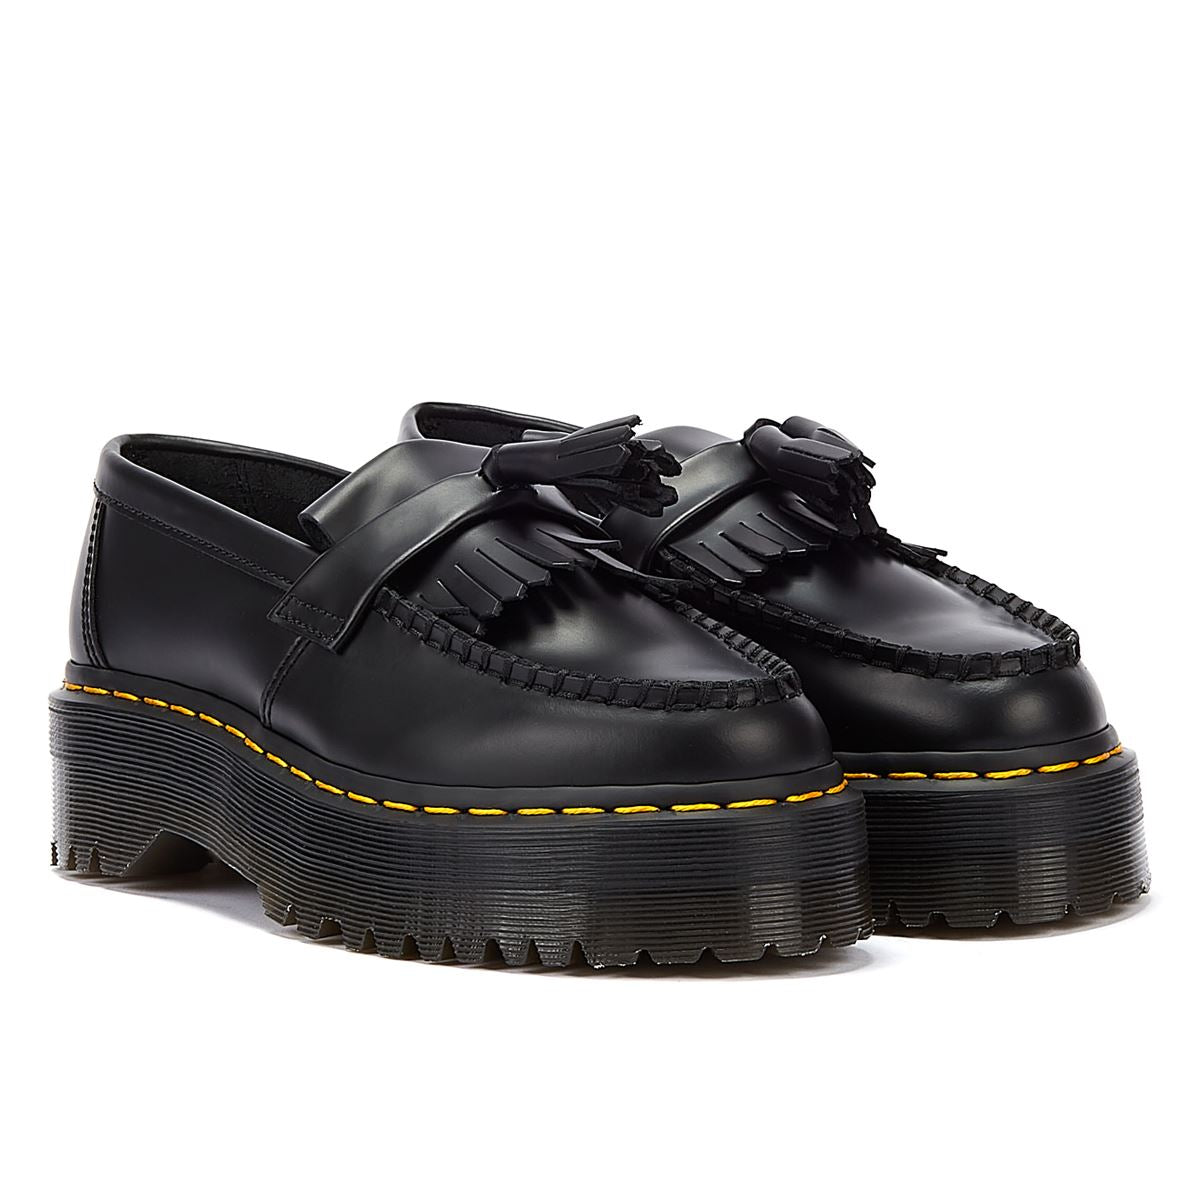 Dr. Martens Adrian Quad Smooth Women’s Black Loafers